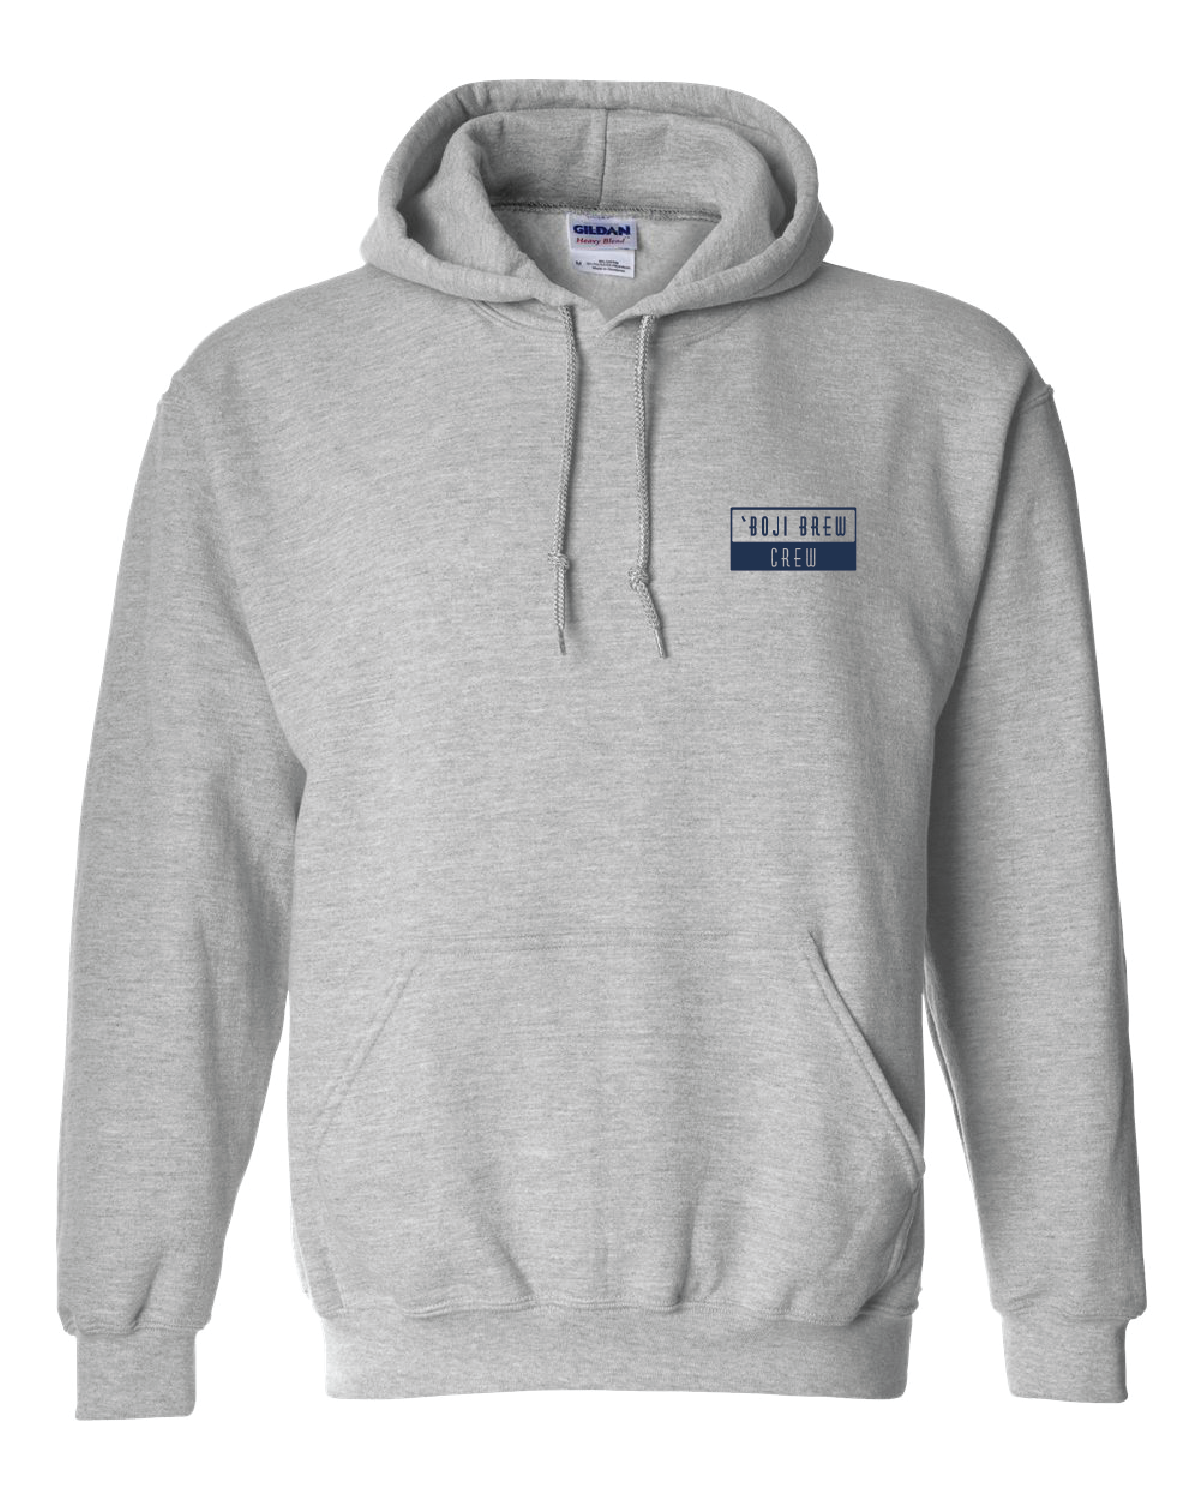 Lifeguard Adult Hooded Sweatshirt (T320) - More Colors Available